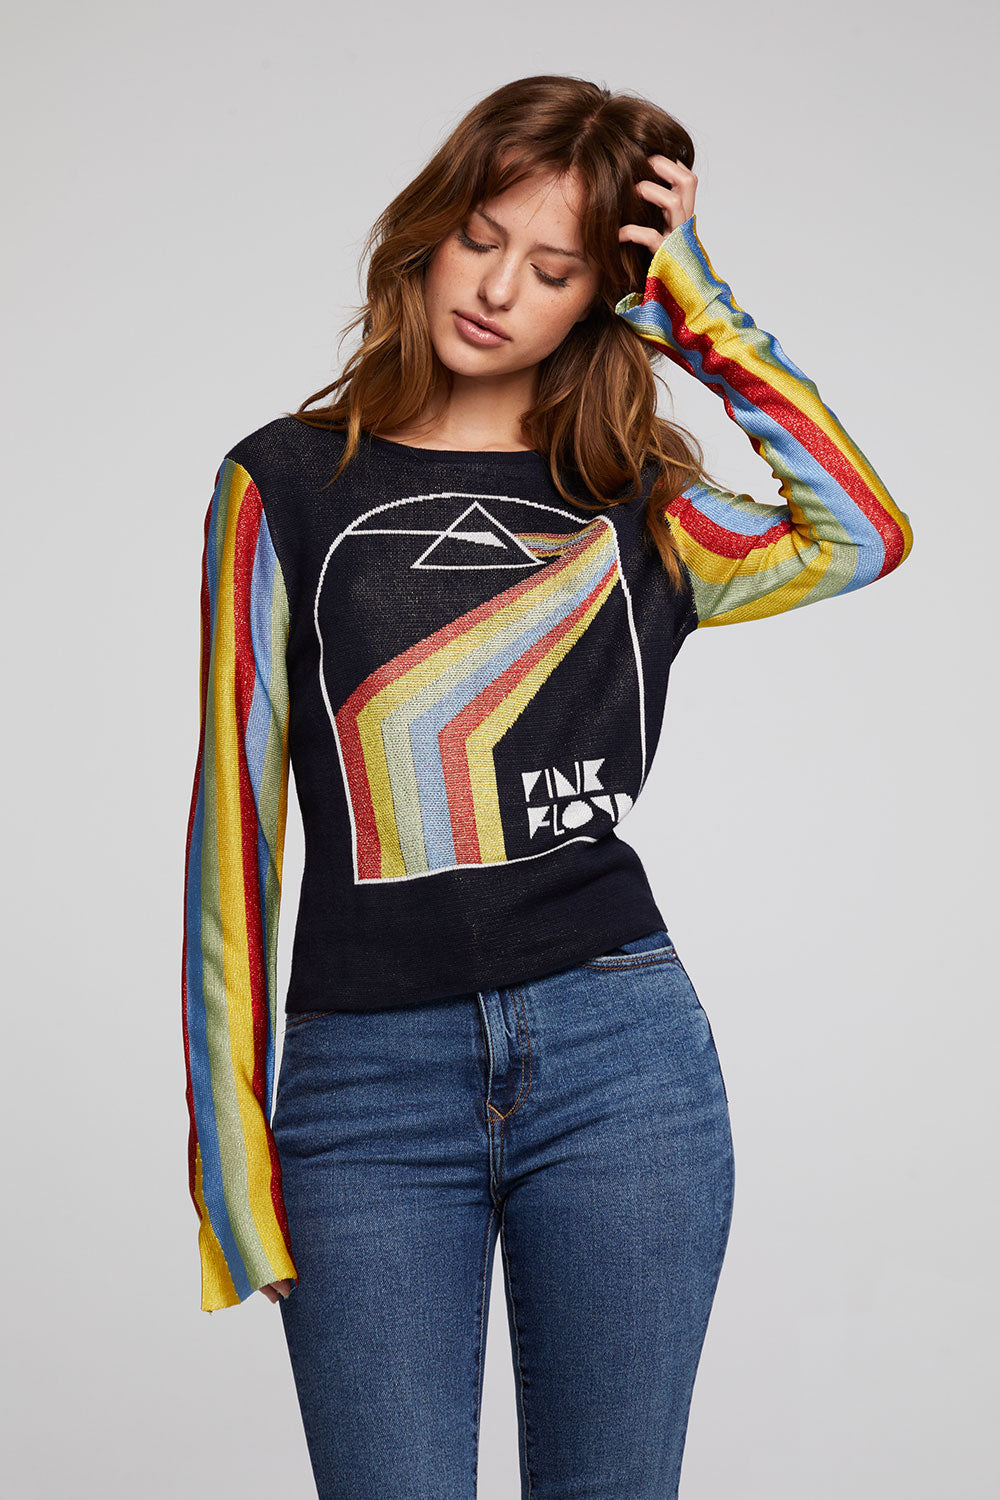 Pink Floyd Prism Sweater WOMENS chaserbrand